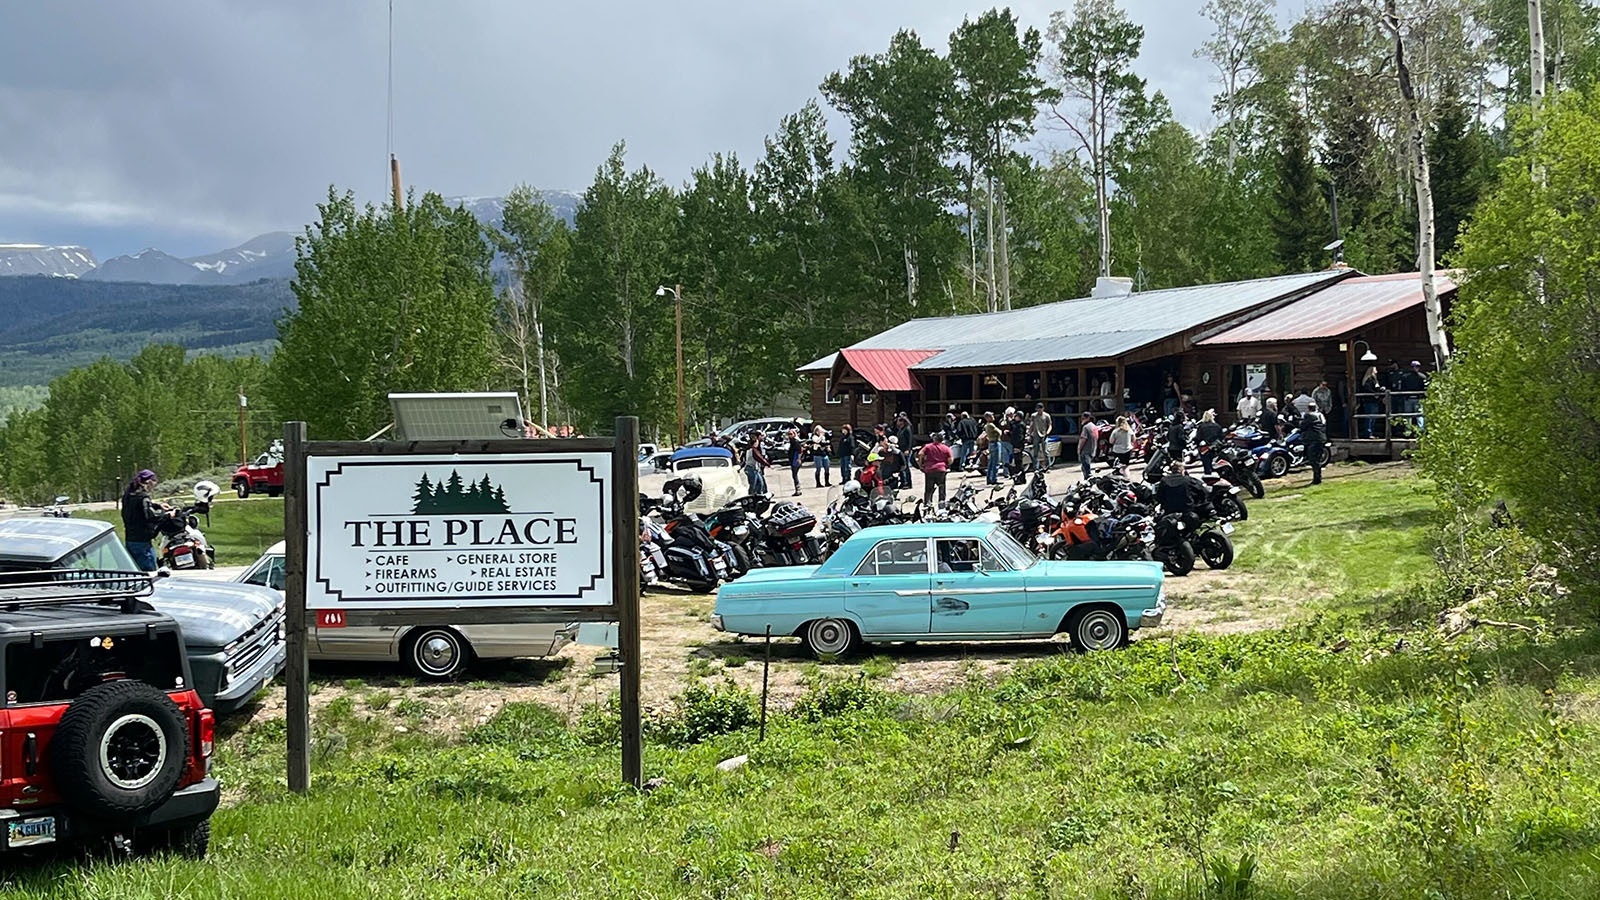 The Boulder Poker Run made its first stop in Cora, Wyoming.